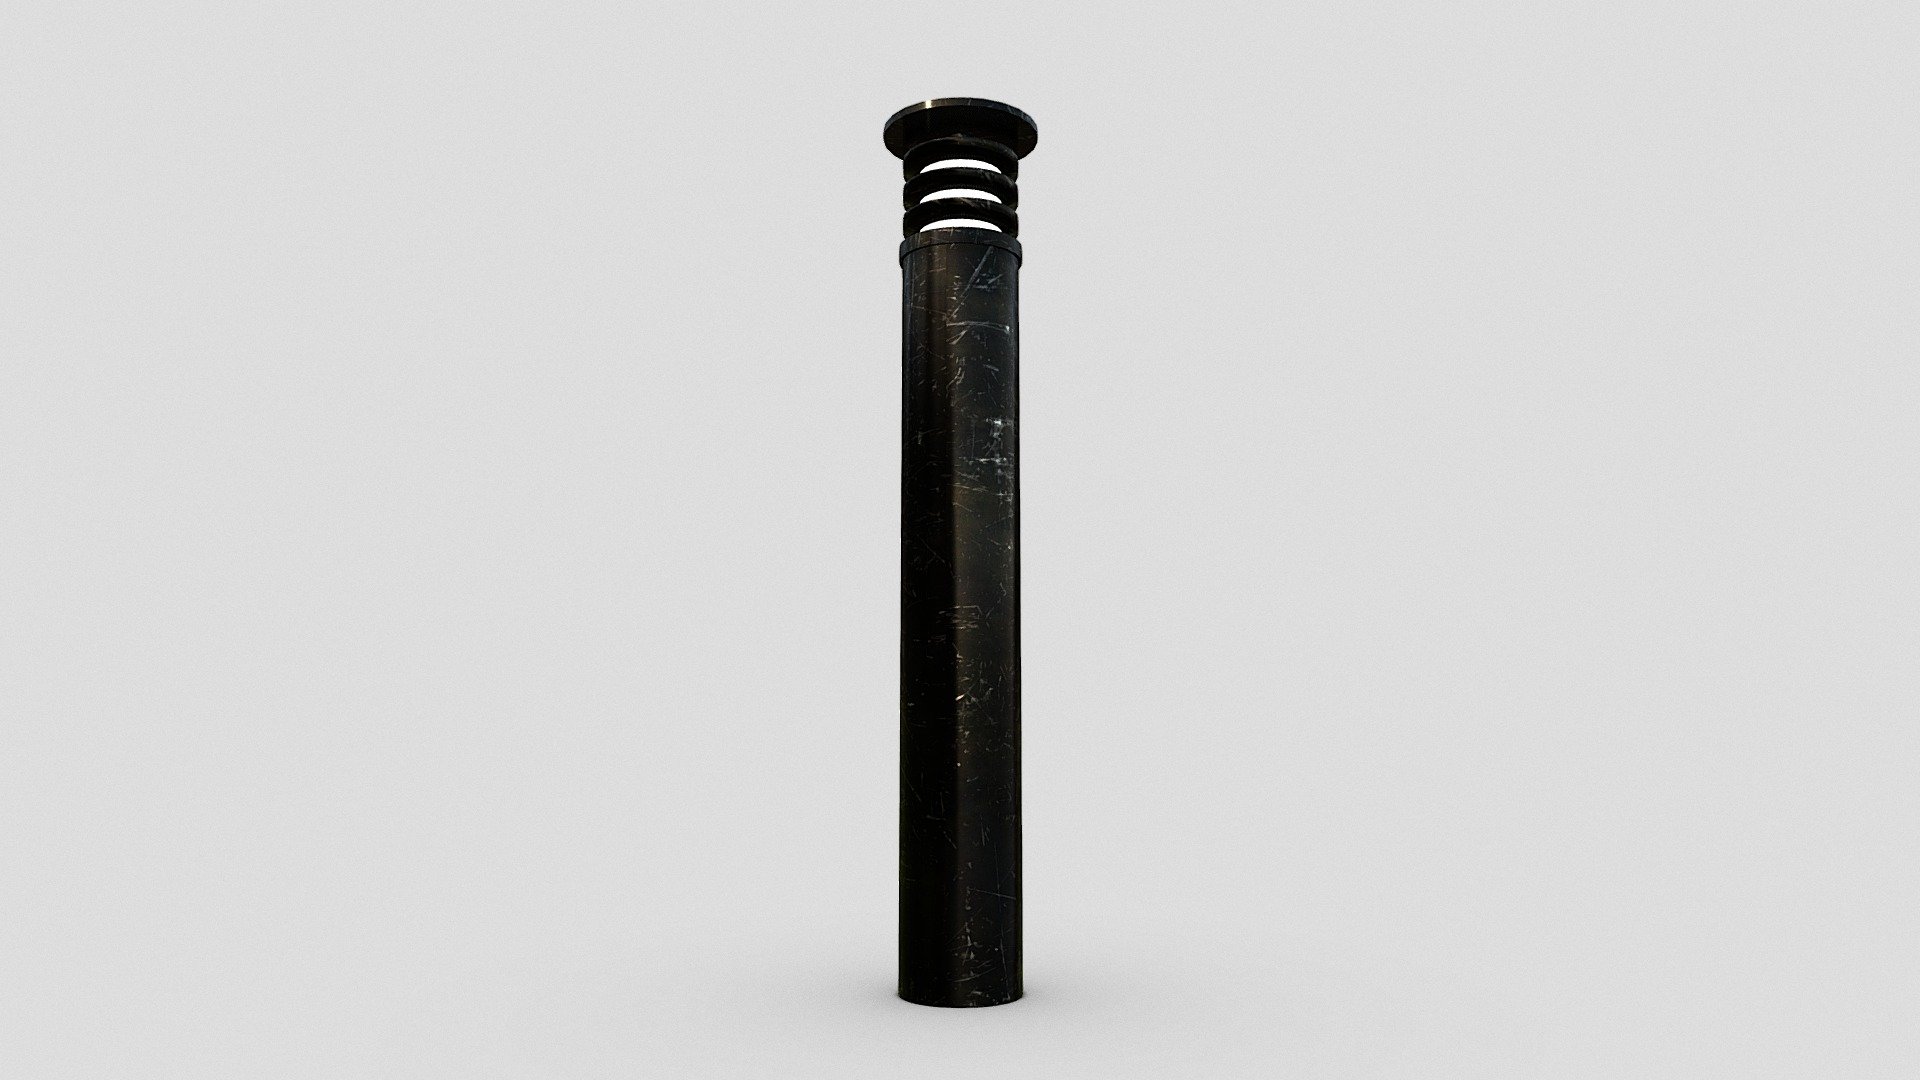 Street bollards are often used to prevent cars from driving onto sidewalks, and this 3d model of a steel sidewalk bollard can help you create that same effect in your scenes. The sidewalk steel bollard takes on realistic-looking steel material with emmissive light. Create an enclosure over sensitive building material like construction or excavation areas by adding bollards for pedestrians 3d model